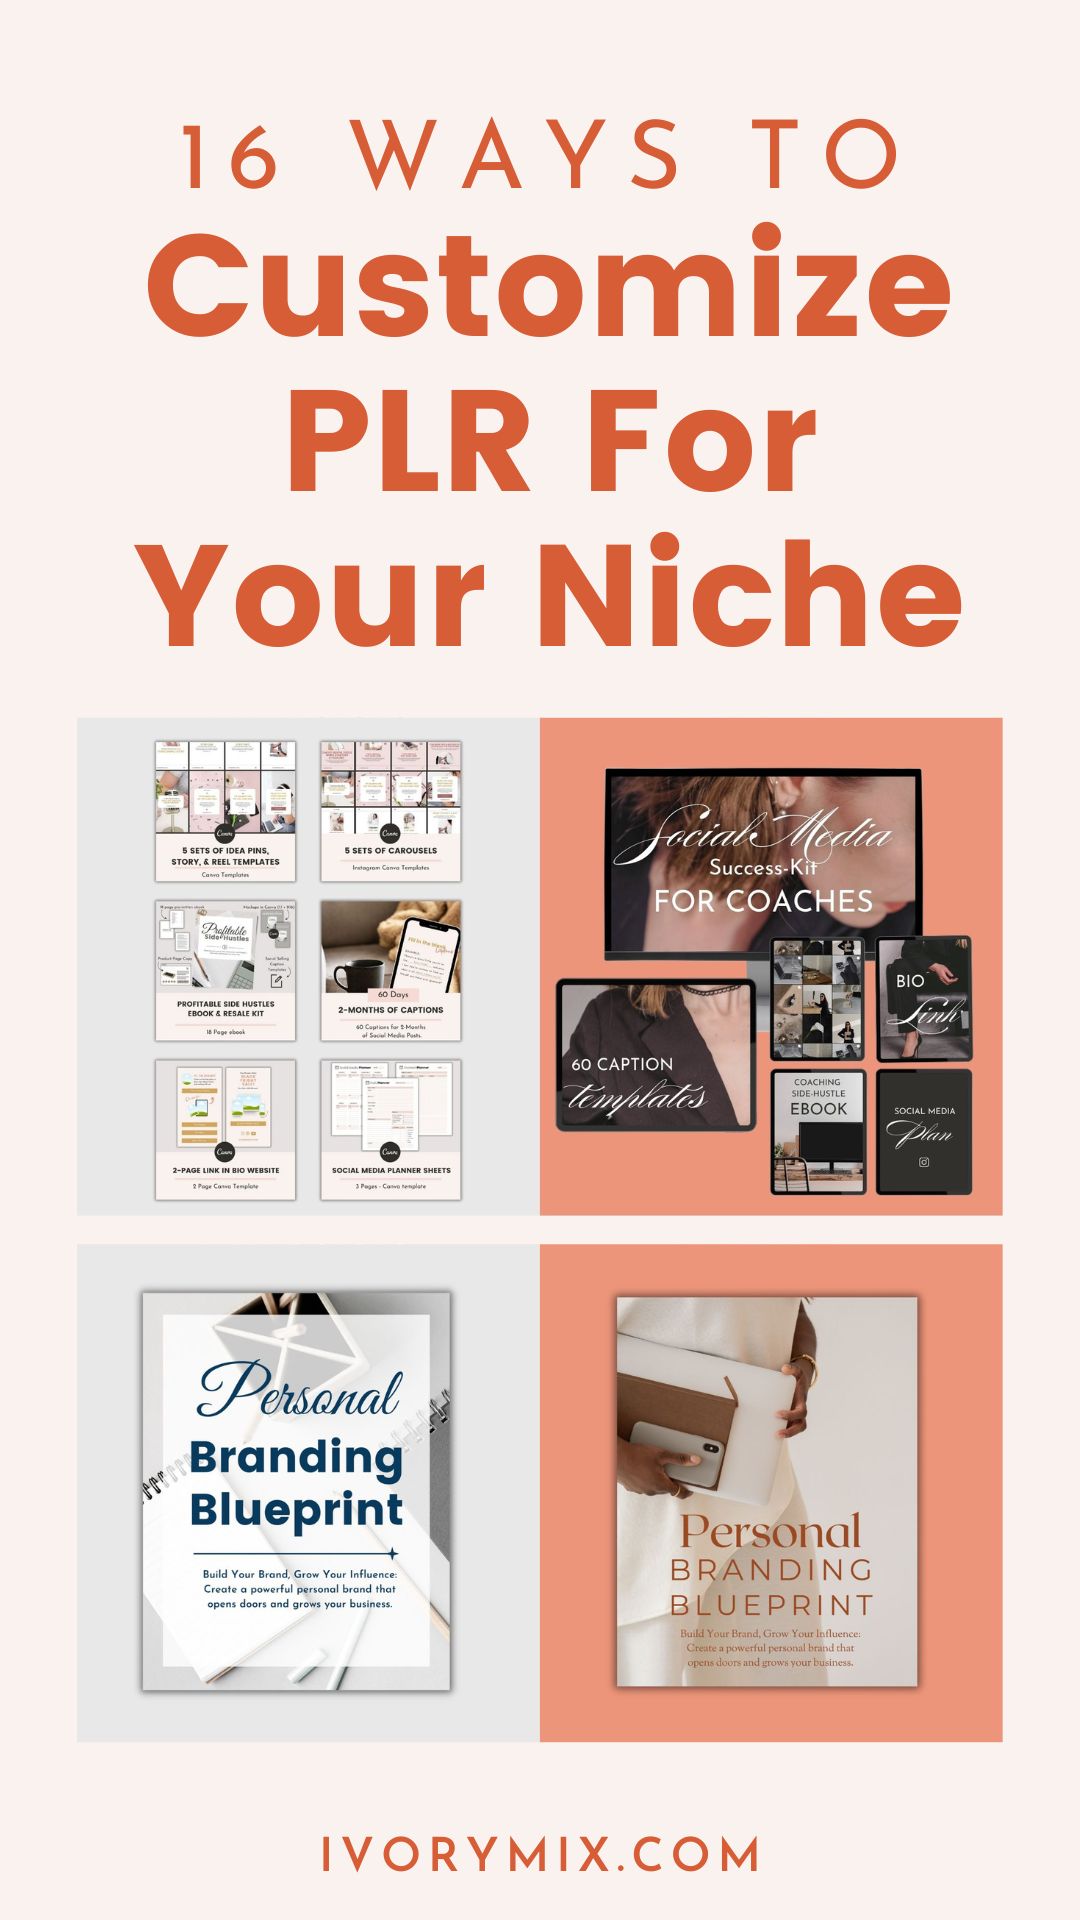 16 ways to customize PLR for your niche